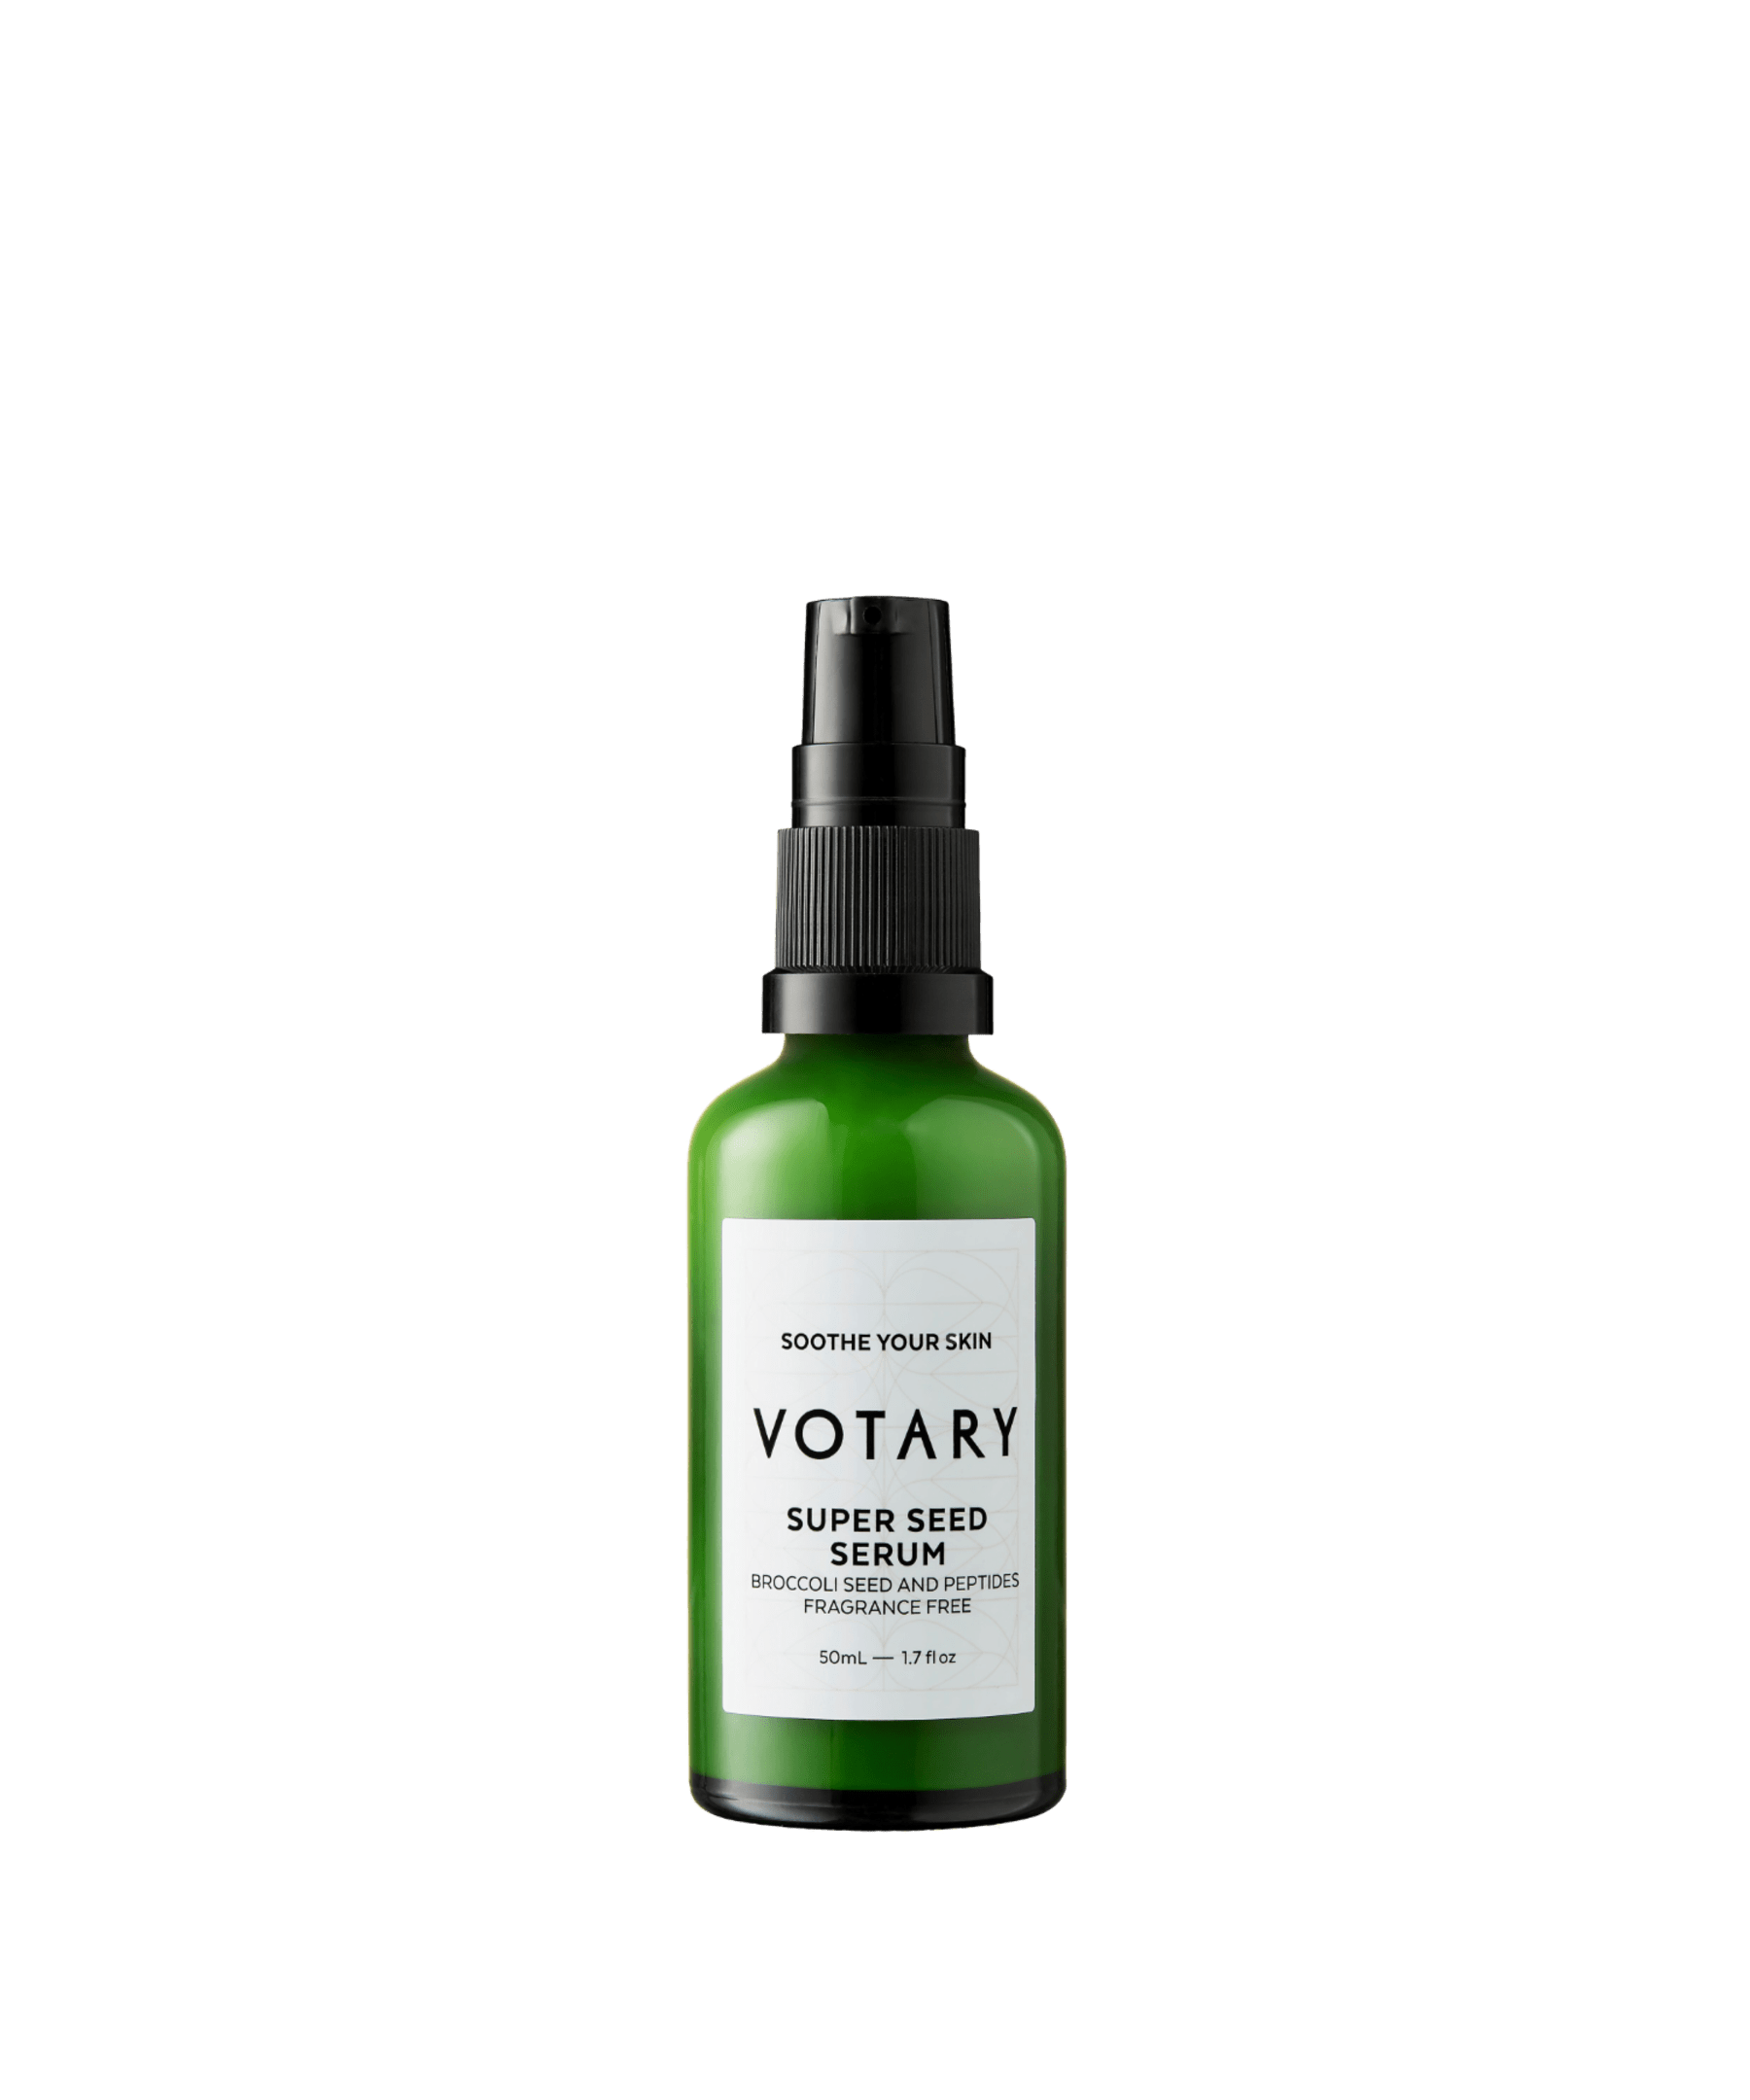 VOTARY Super Seed Serum - Broccoli Seed and Peptides 50 ml